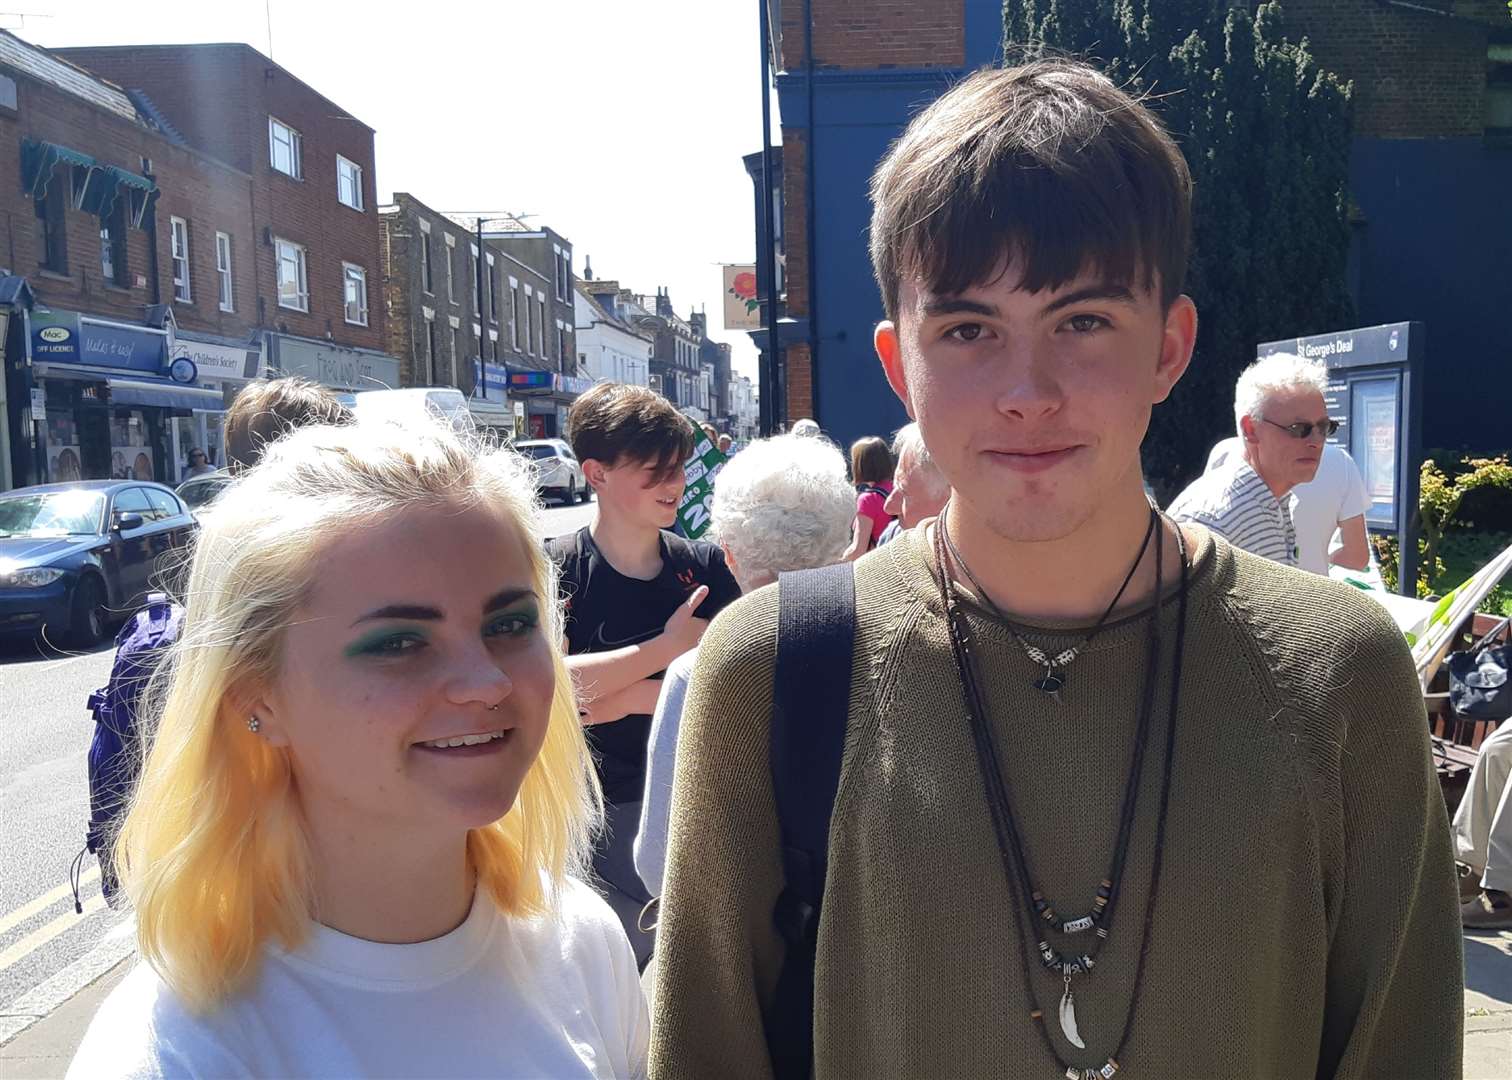 Protest organisers Millie Manners and Sam Brookfield